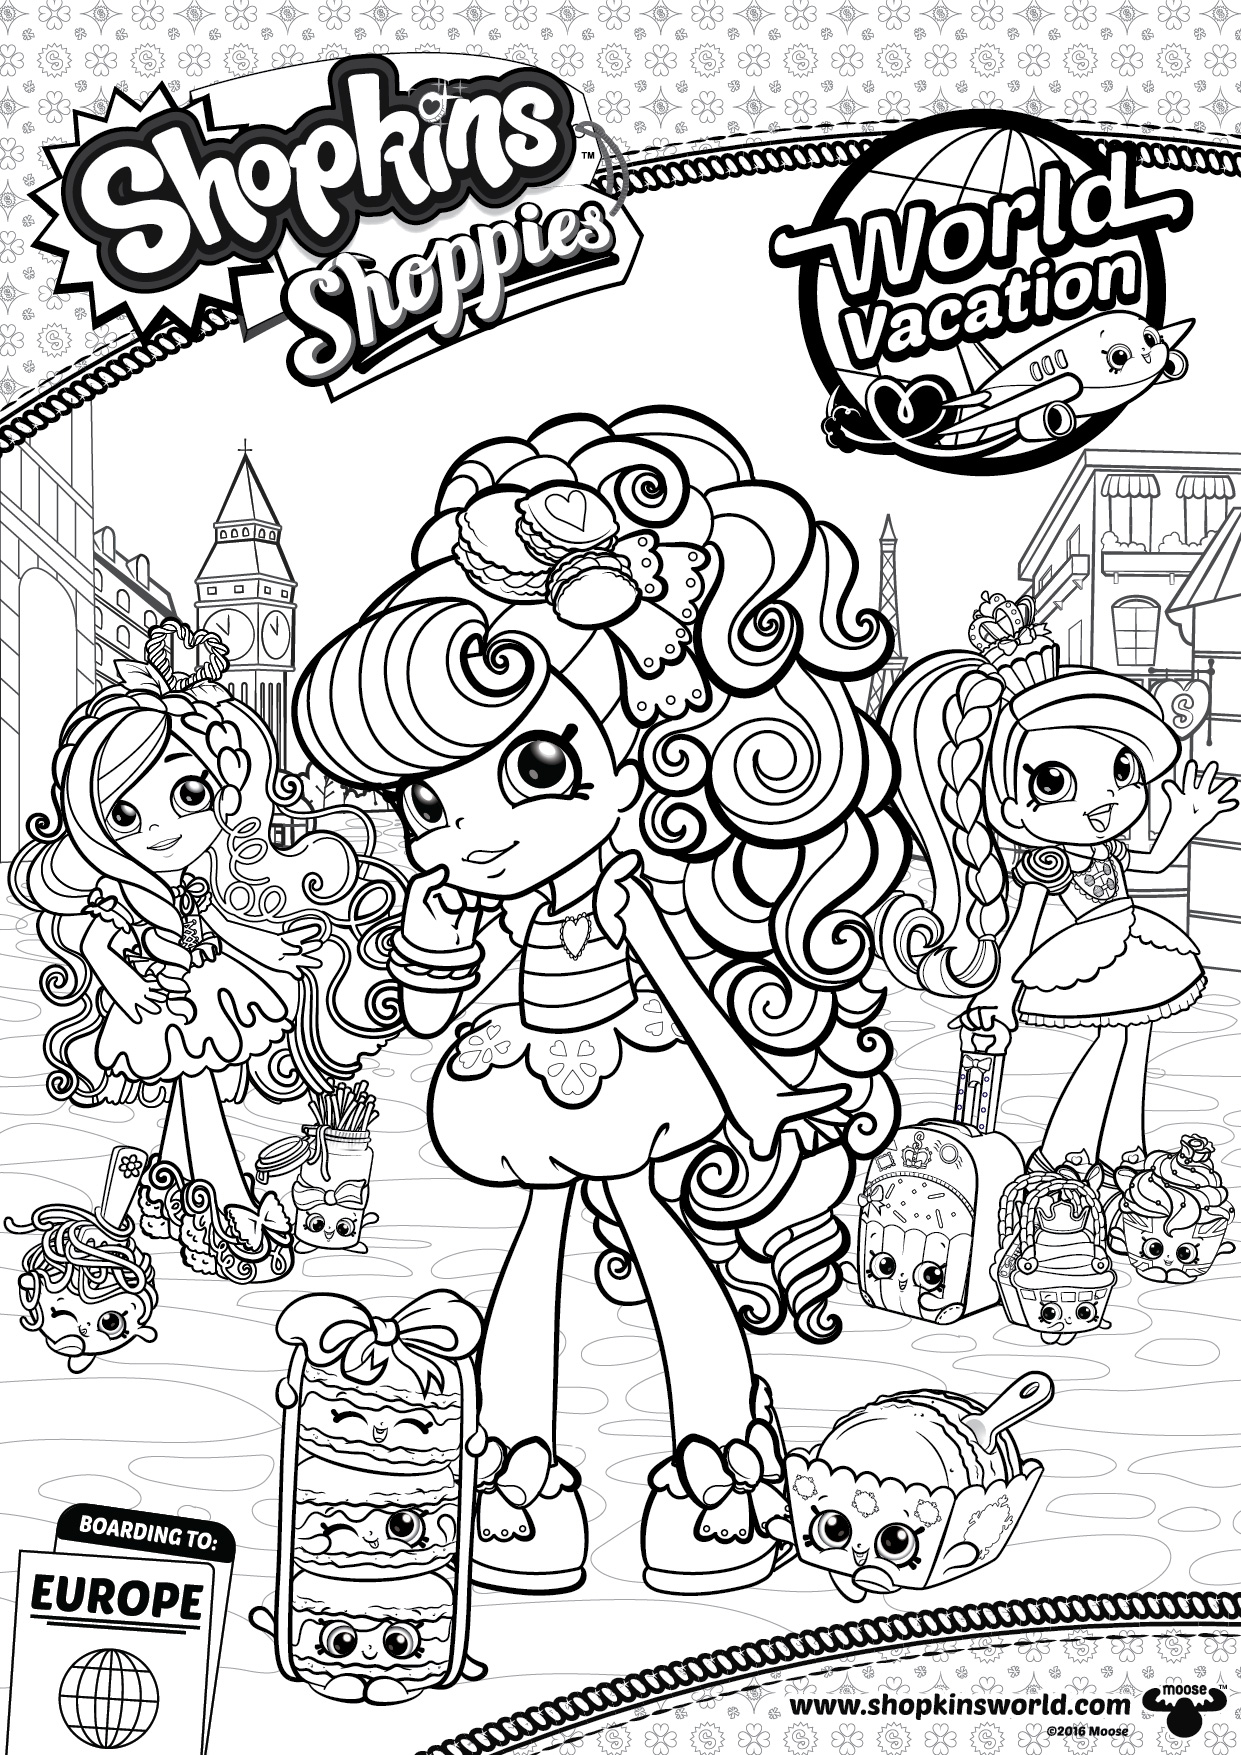 Free Shopkins Shoppies Coloring Pages Shoppies Group printable